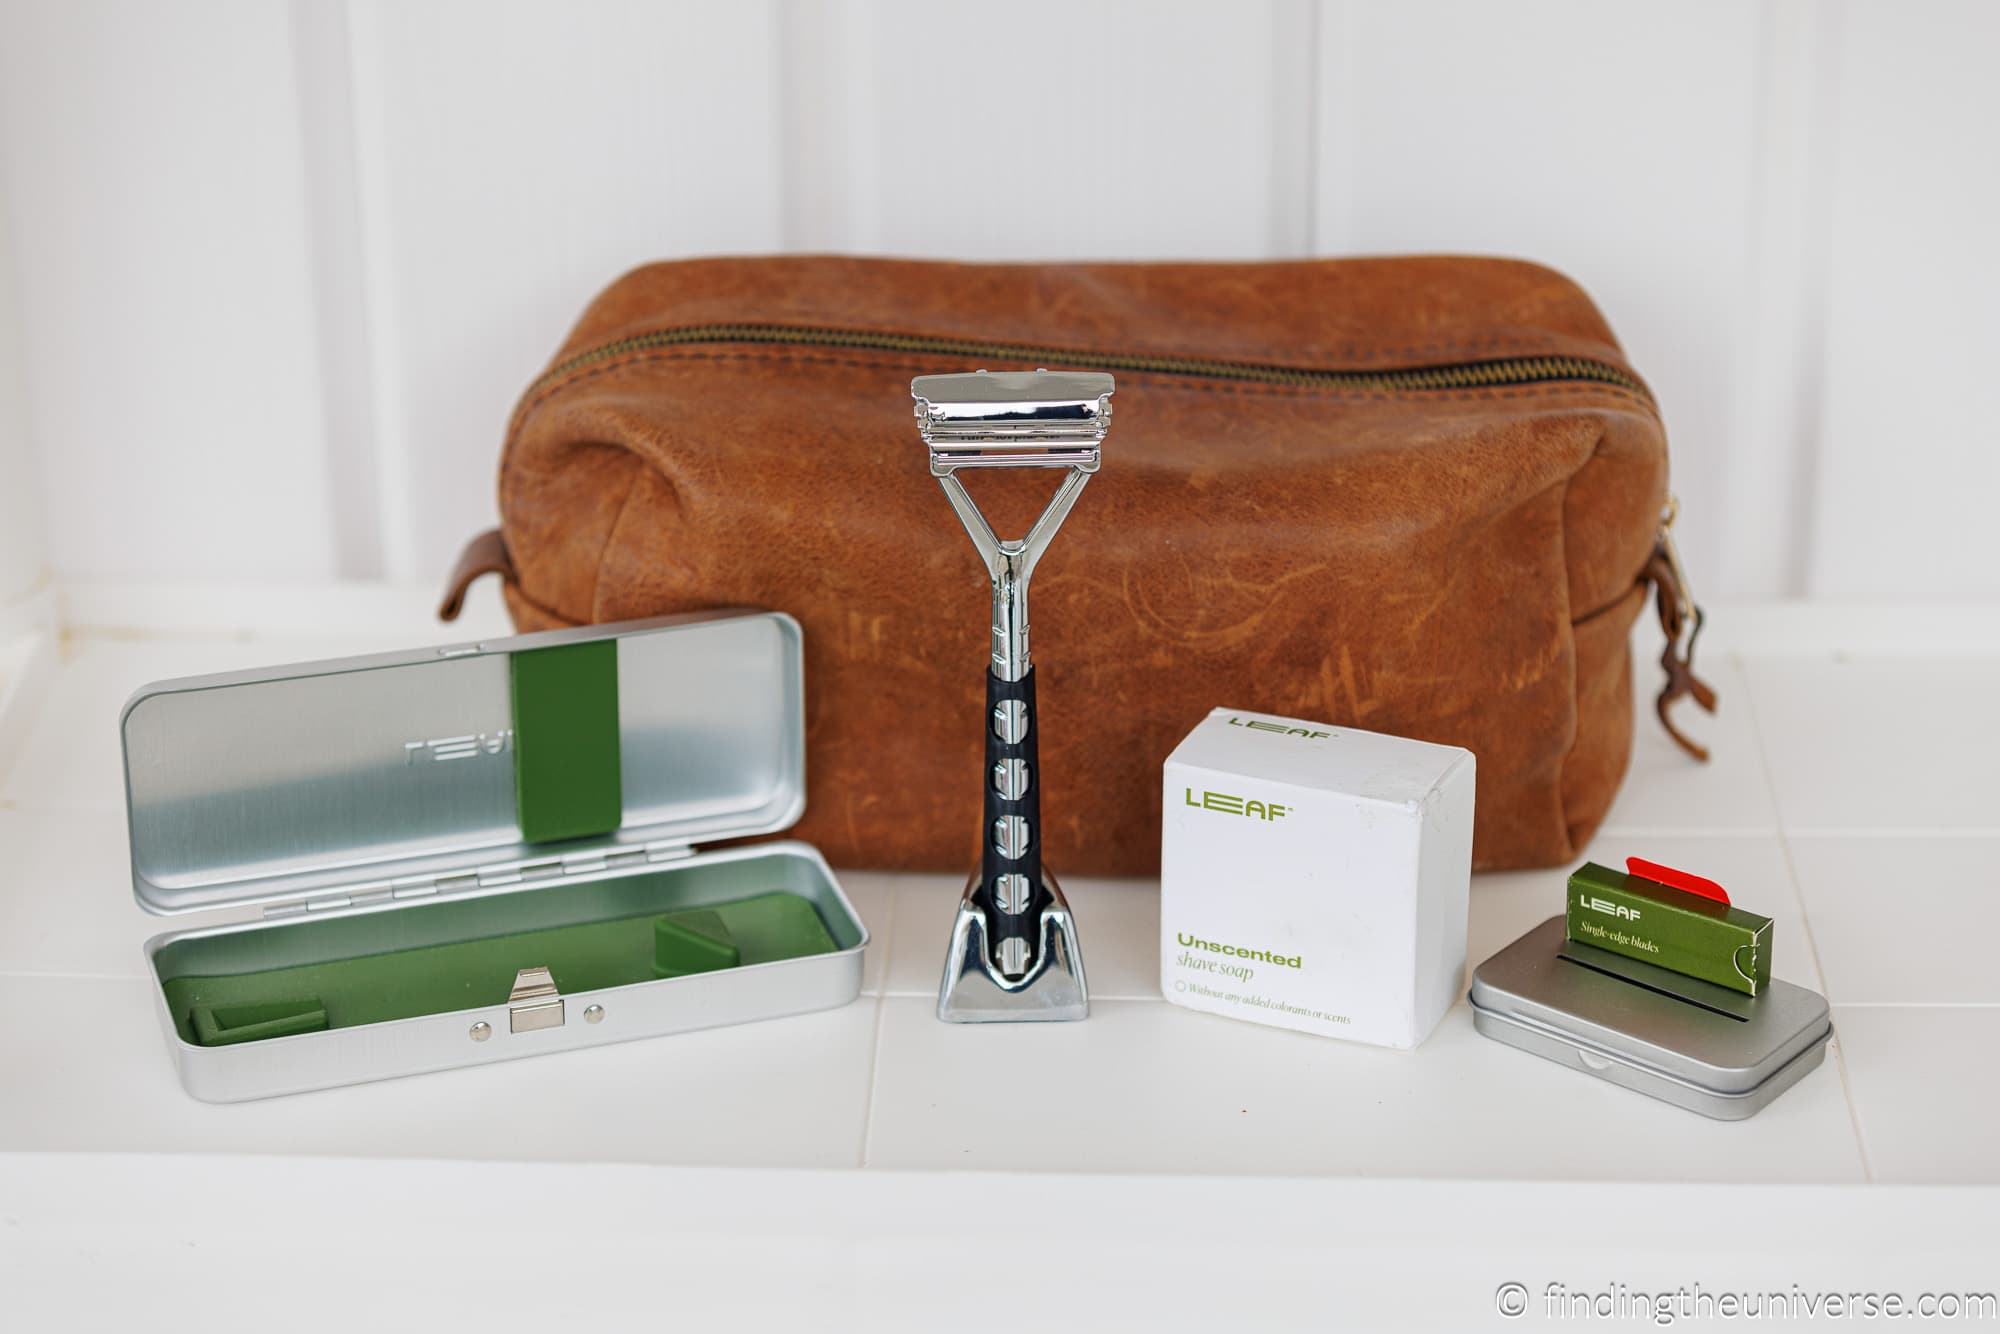 Tips for Traveling with a Safety Razor